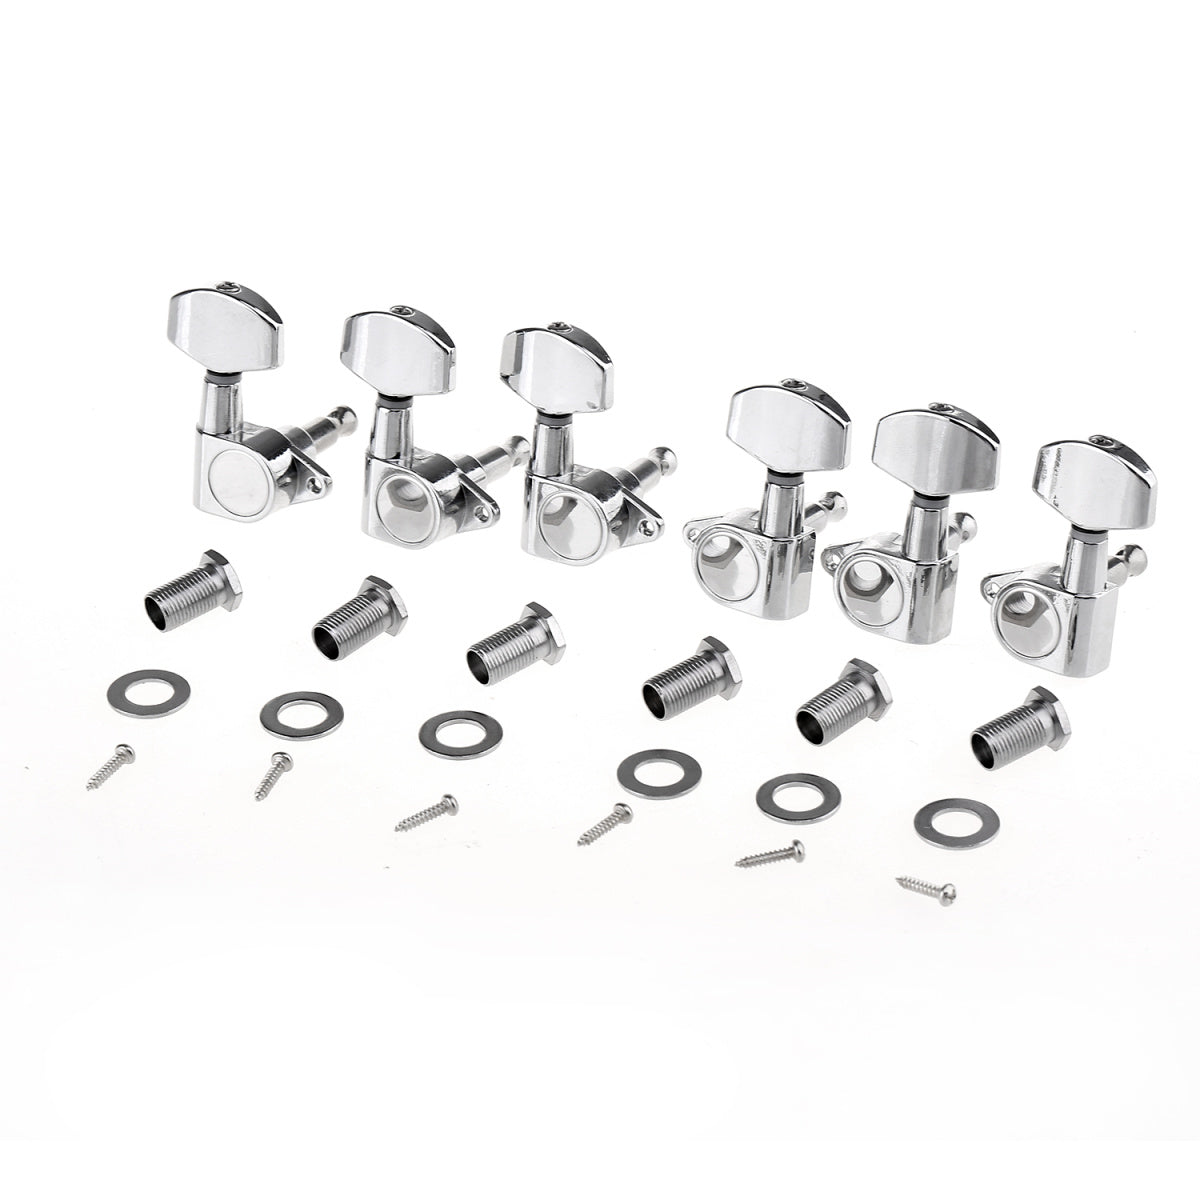 Musiclily Pro 3x3 Epi Style Sealed Guitar Tuners Tuning Pegs Keys Machine Heads Set for Les Paul Style Guitar, Big Button Chrome